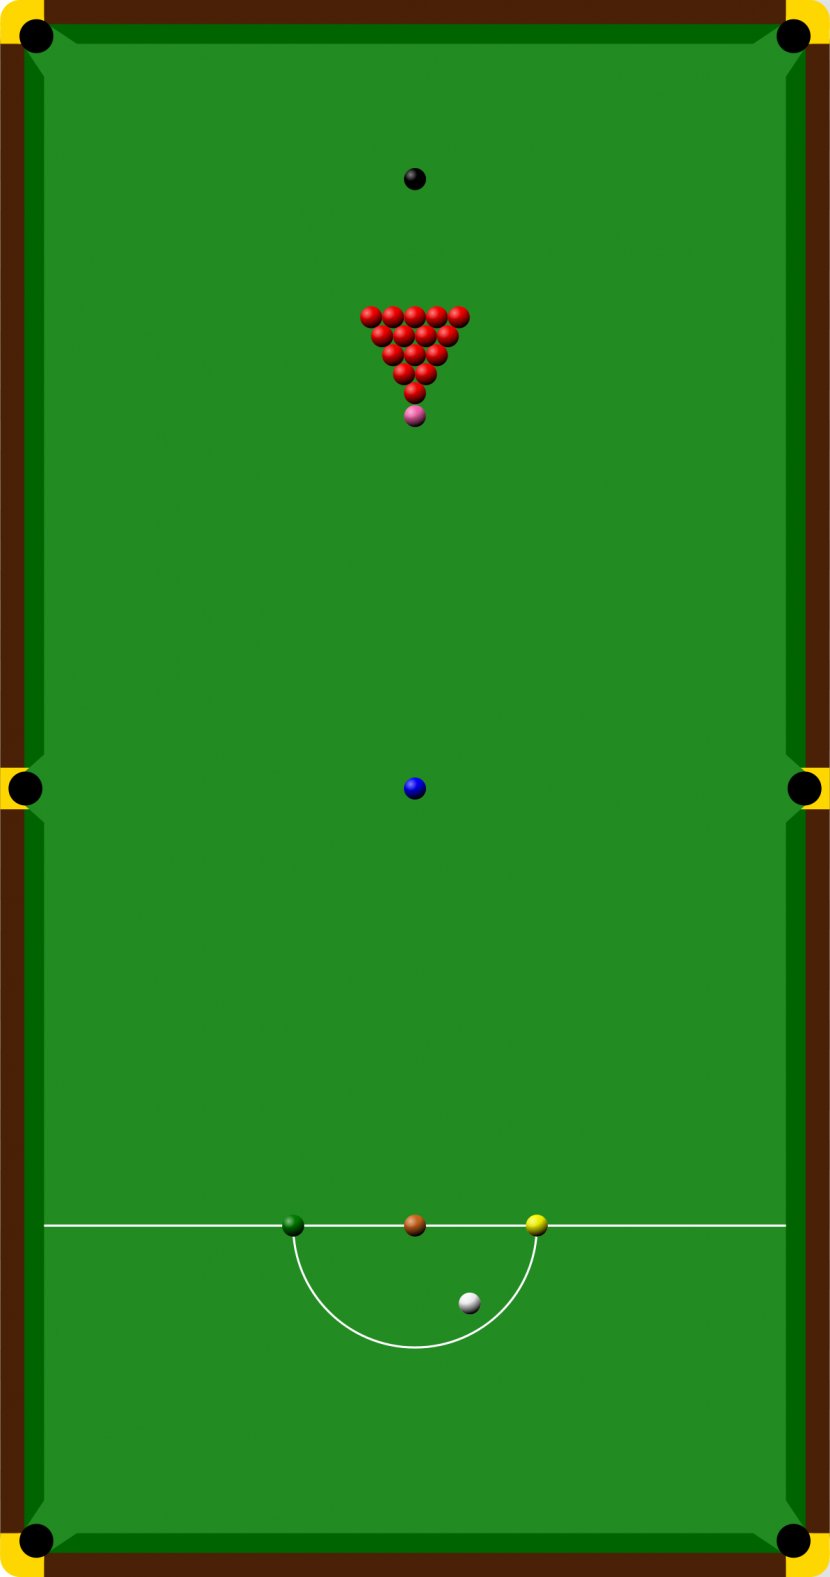 Billiard Tables Snooker Billiards Pool - Indoor Games And Sports Transparent PNG